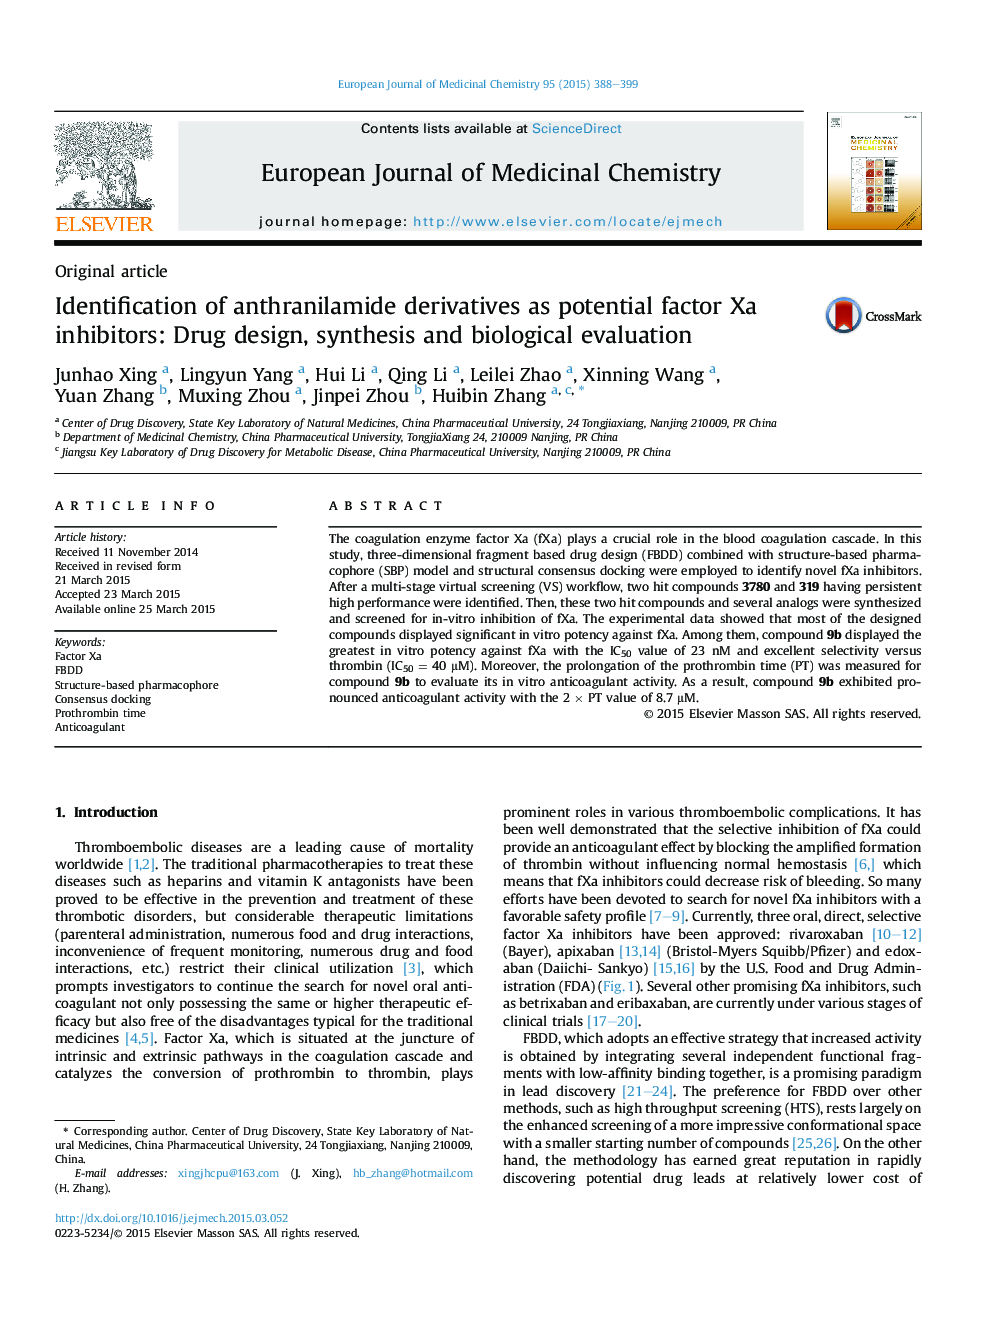 Identification of anthranilamide derivatives as potential factor Xa inhibitors: Drug design, synthesis and biological evaluation